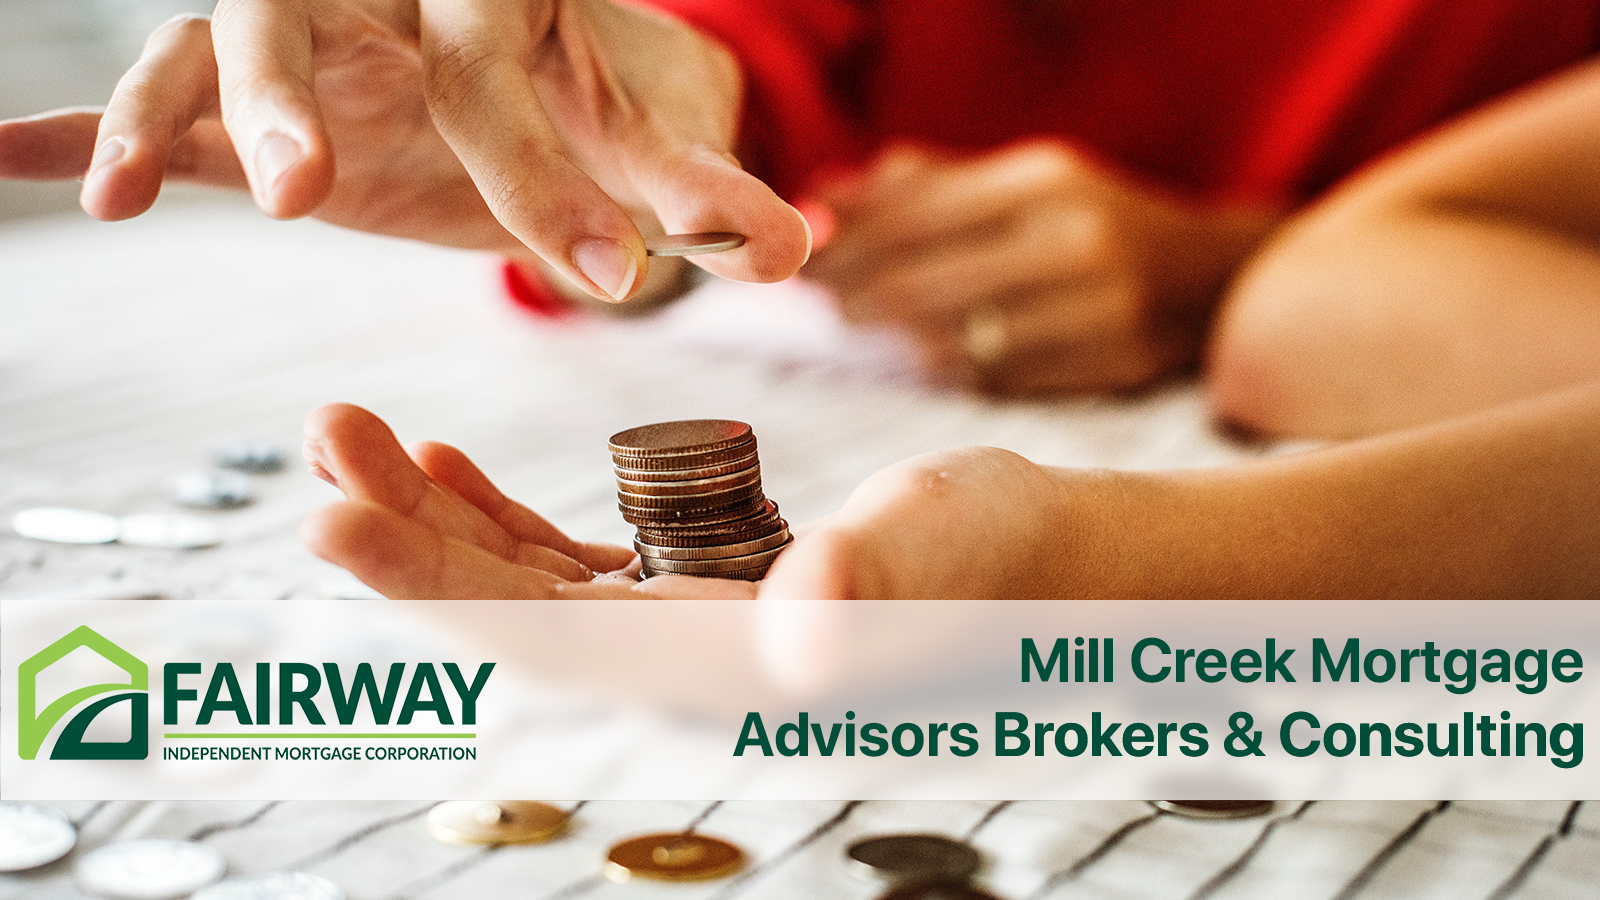 Mill-Creek-Mortgage-Advisors-Brokers-Consulting